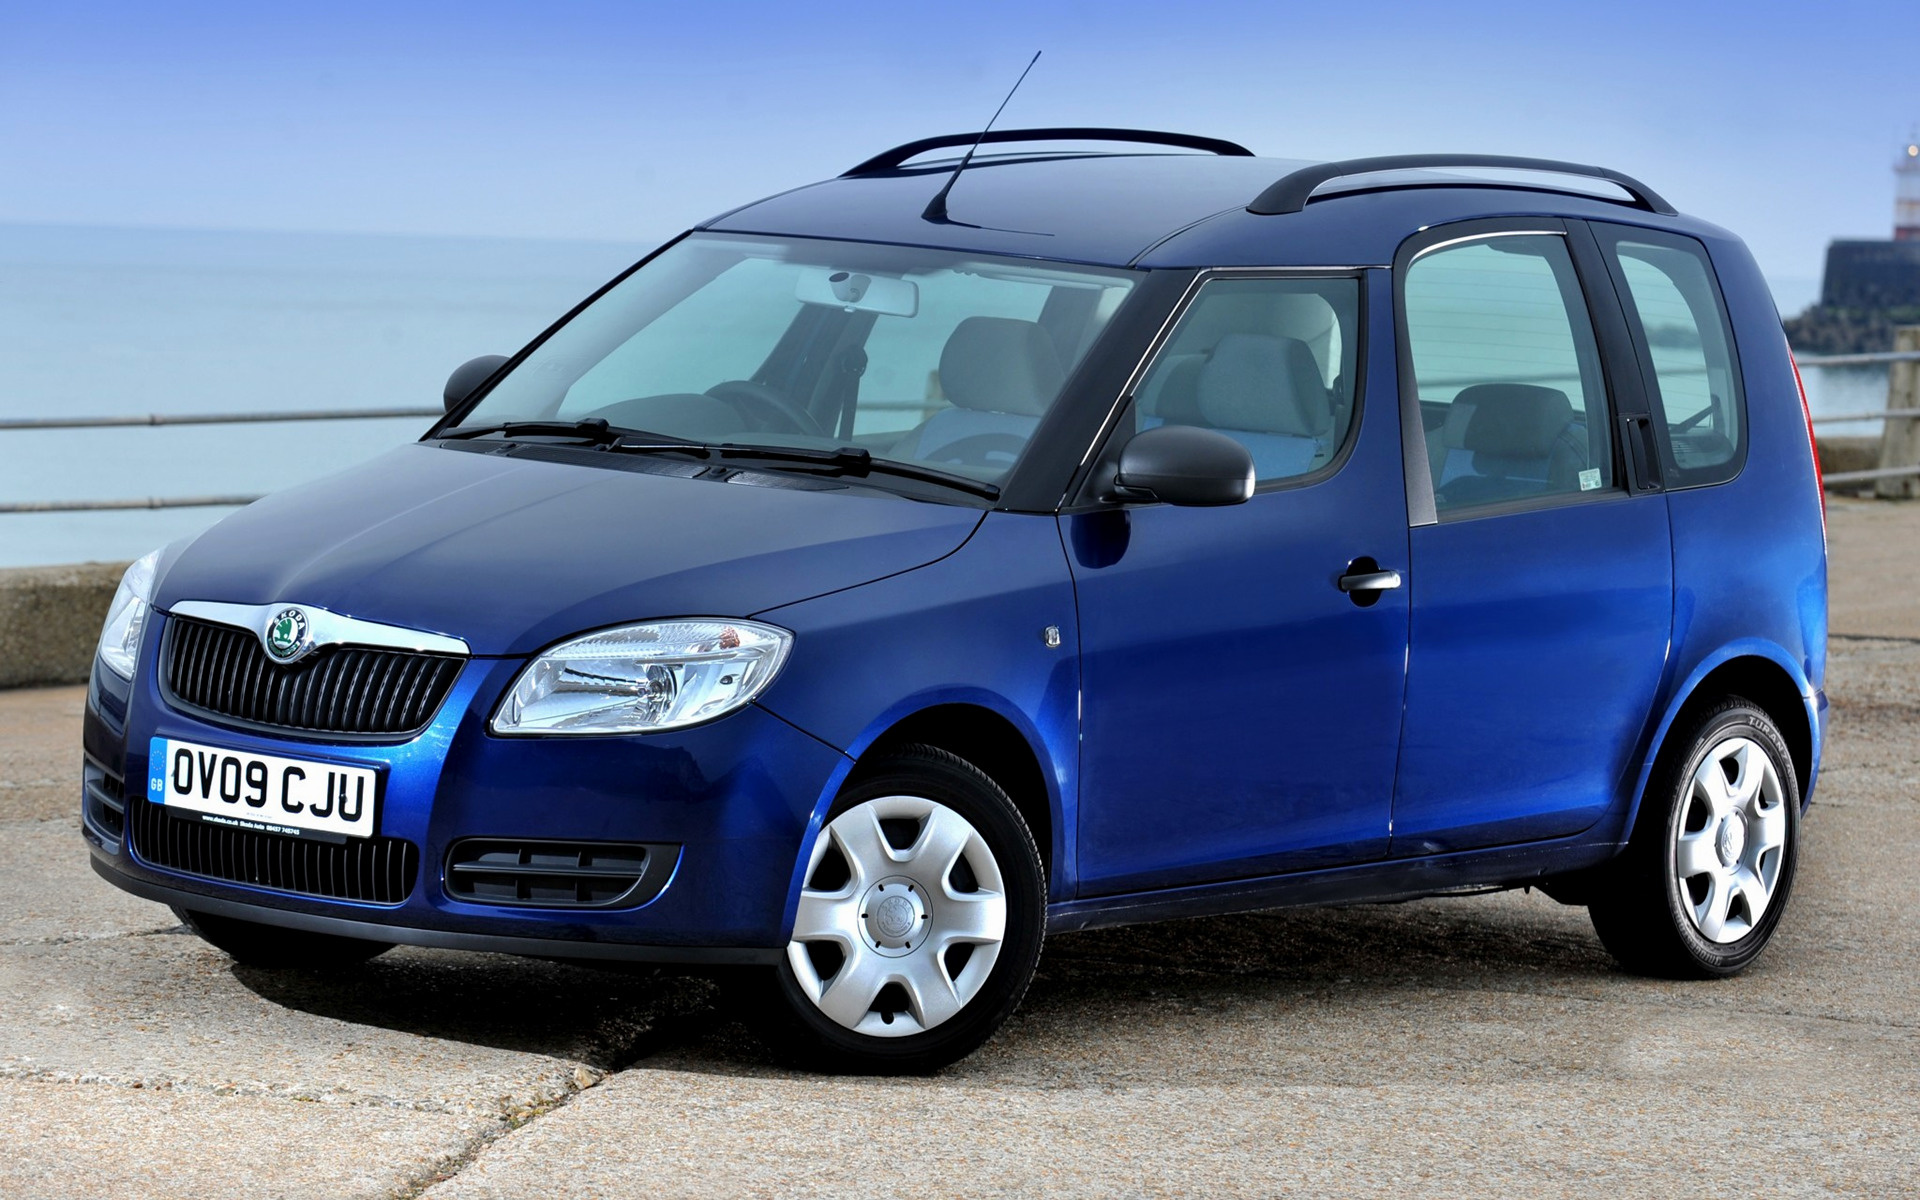 2006 Skoda Roomster (UK) - Wallpapers and HD Images | Car Pixel